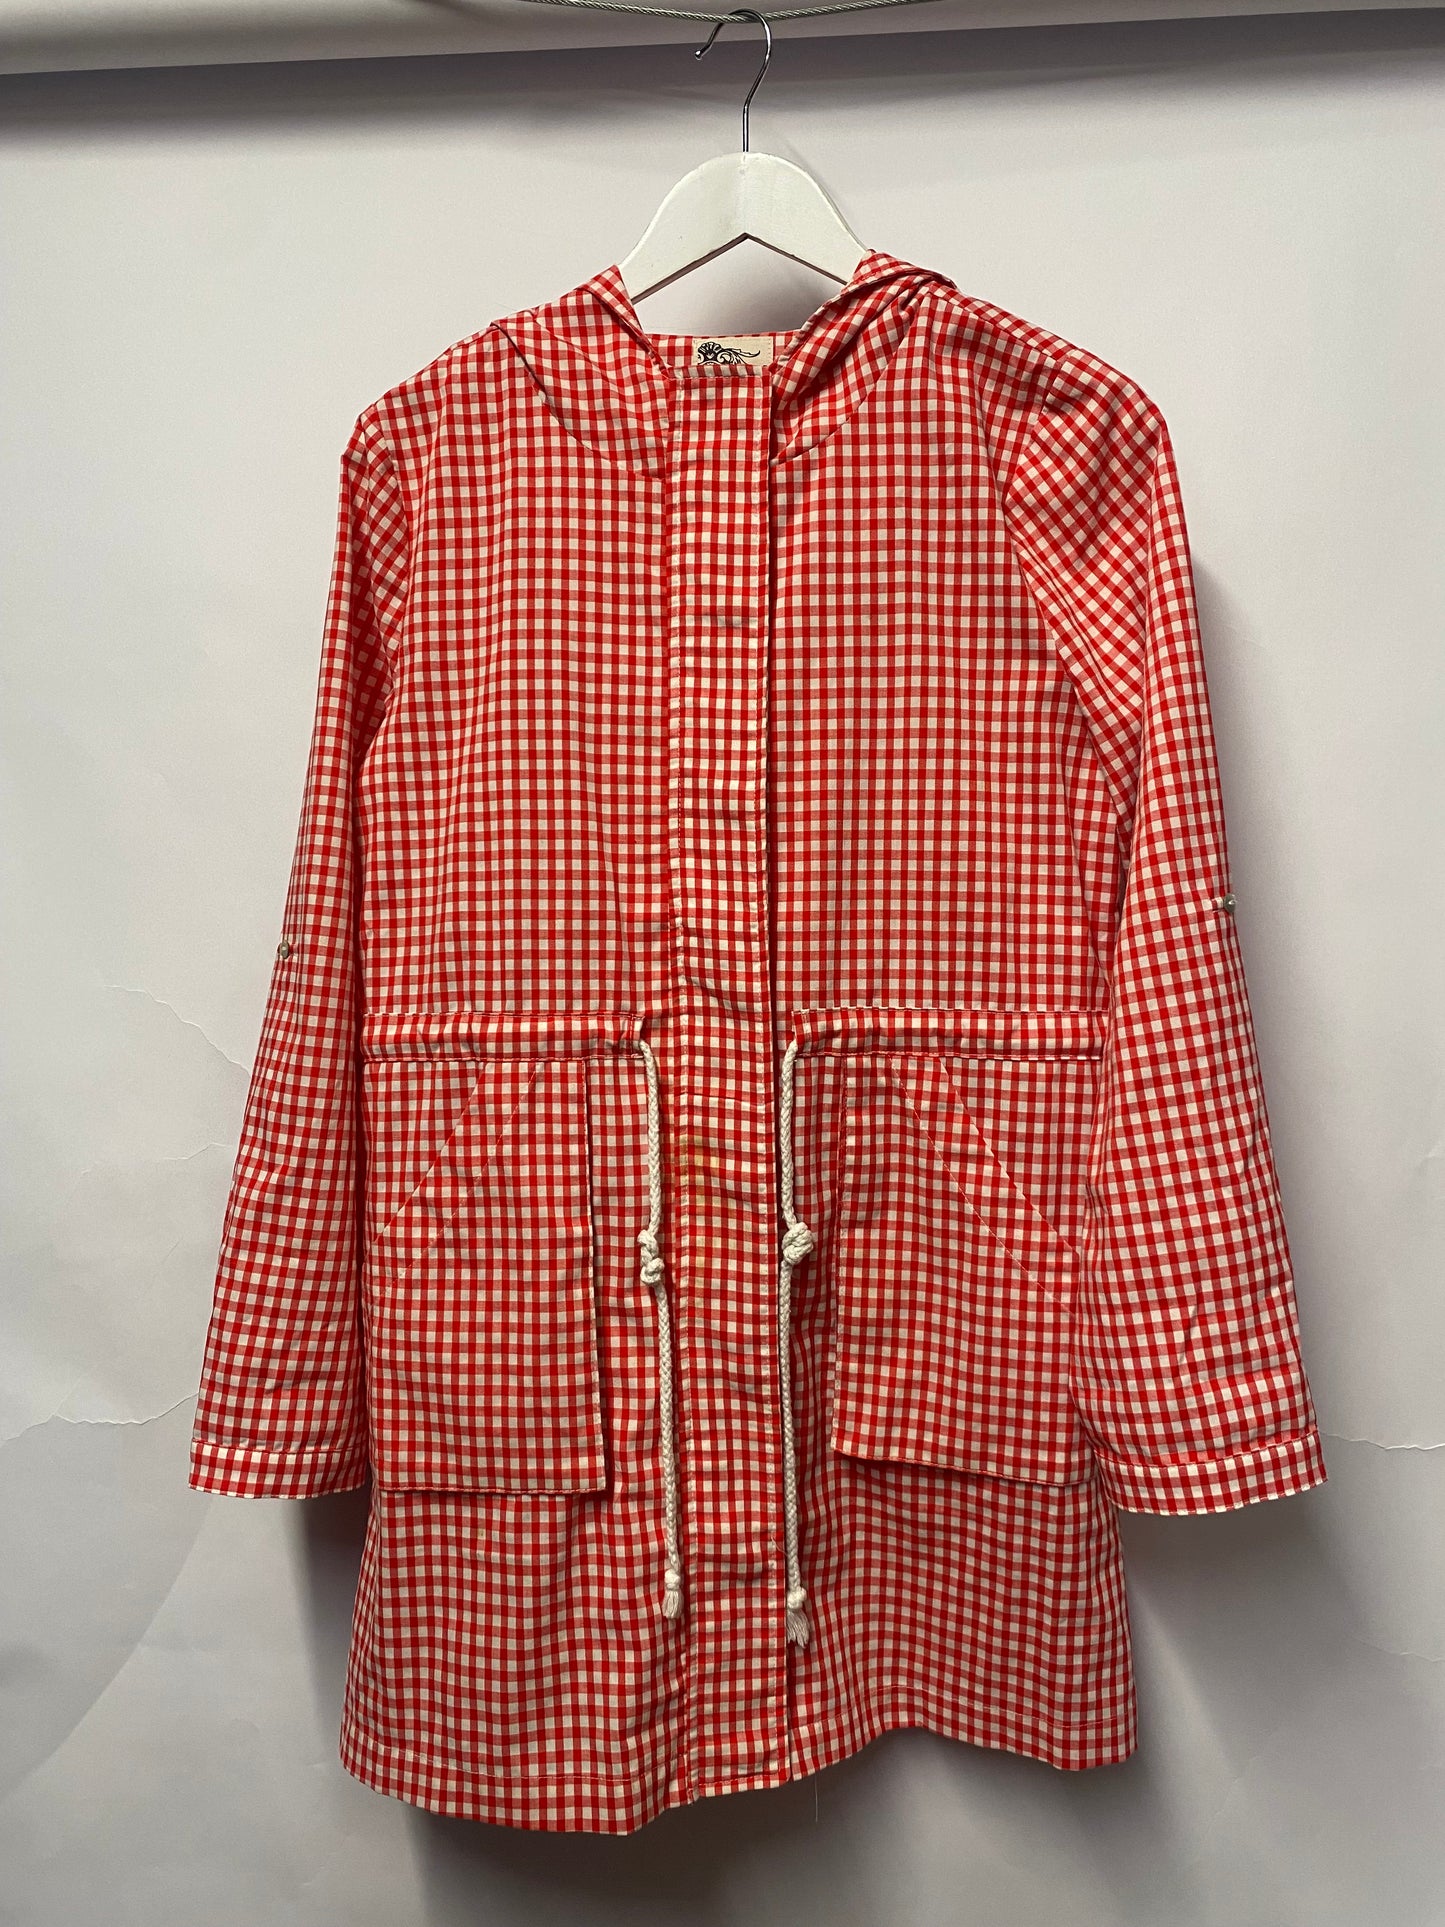 Culle Red and White Gingham Lightweight Cotton Parka Medium